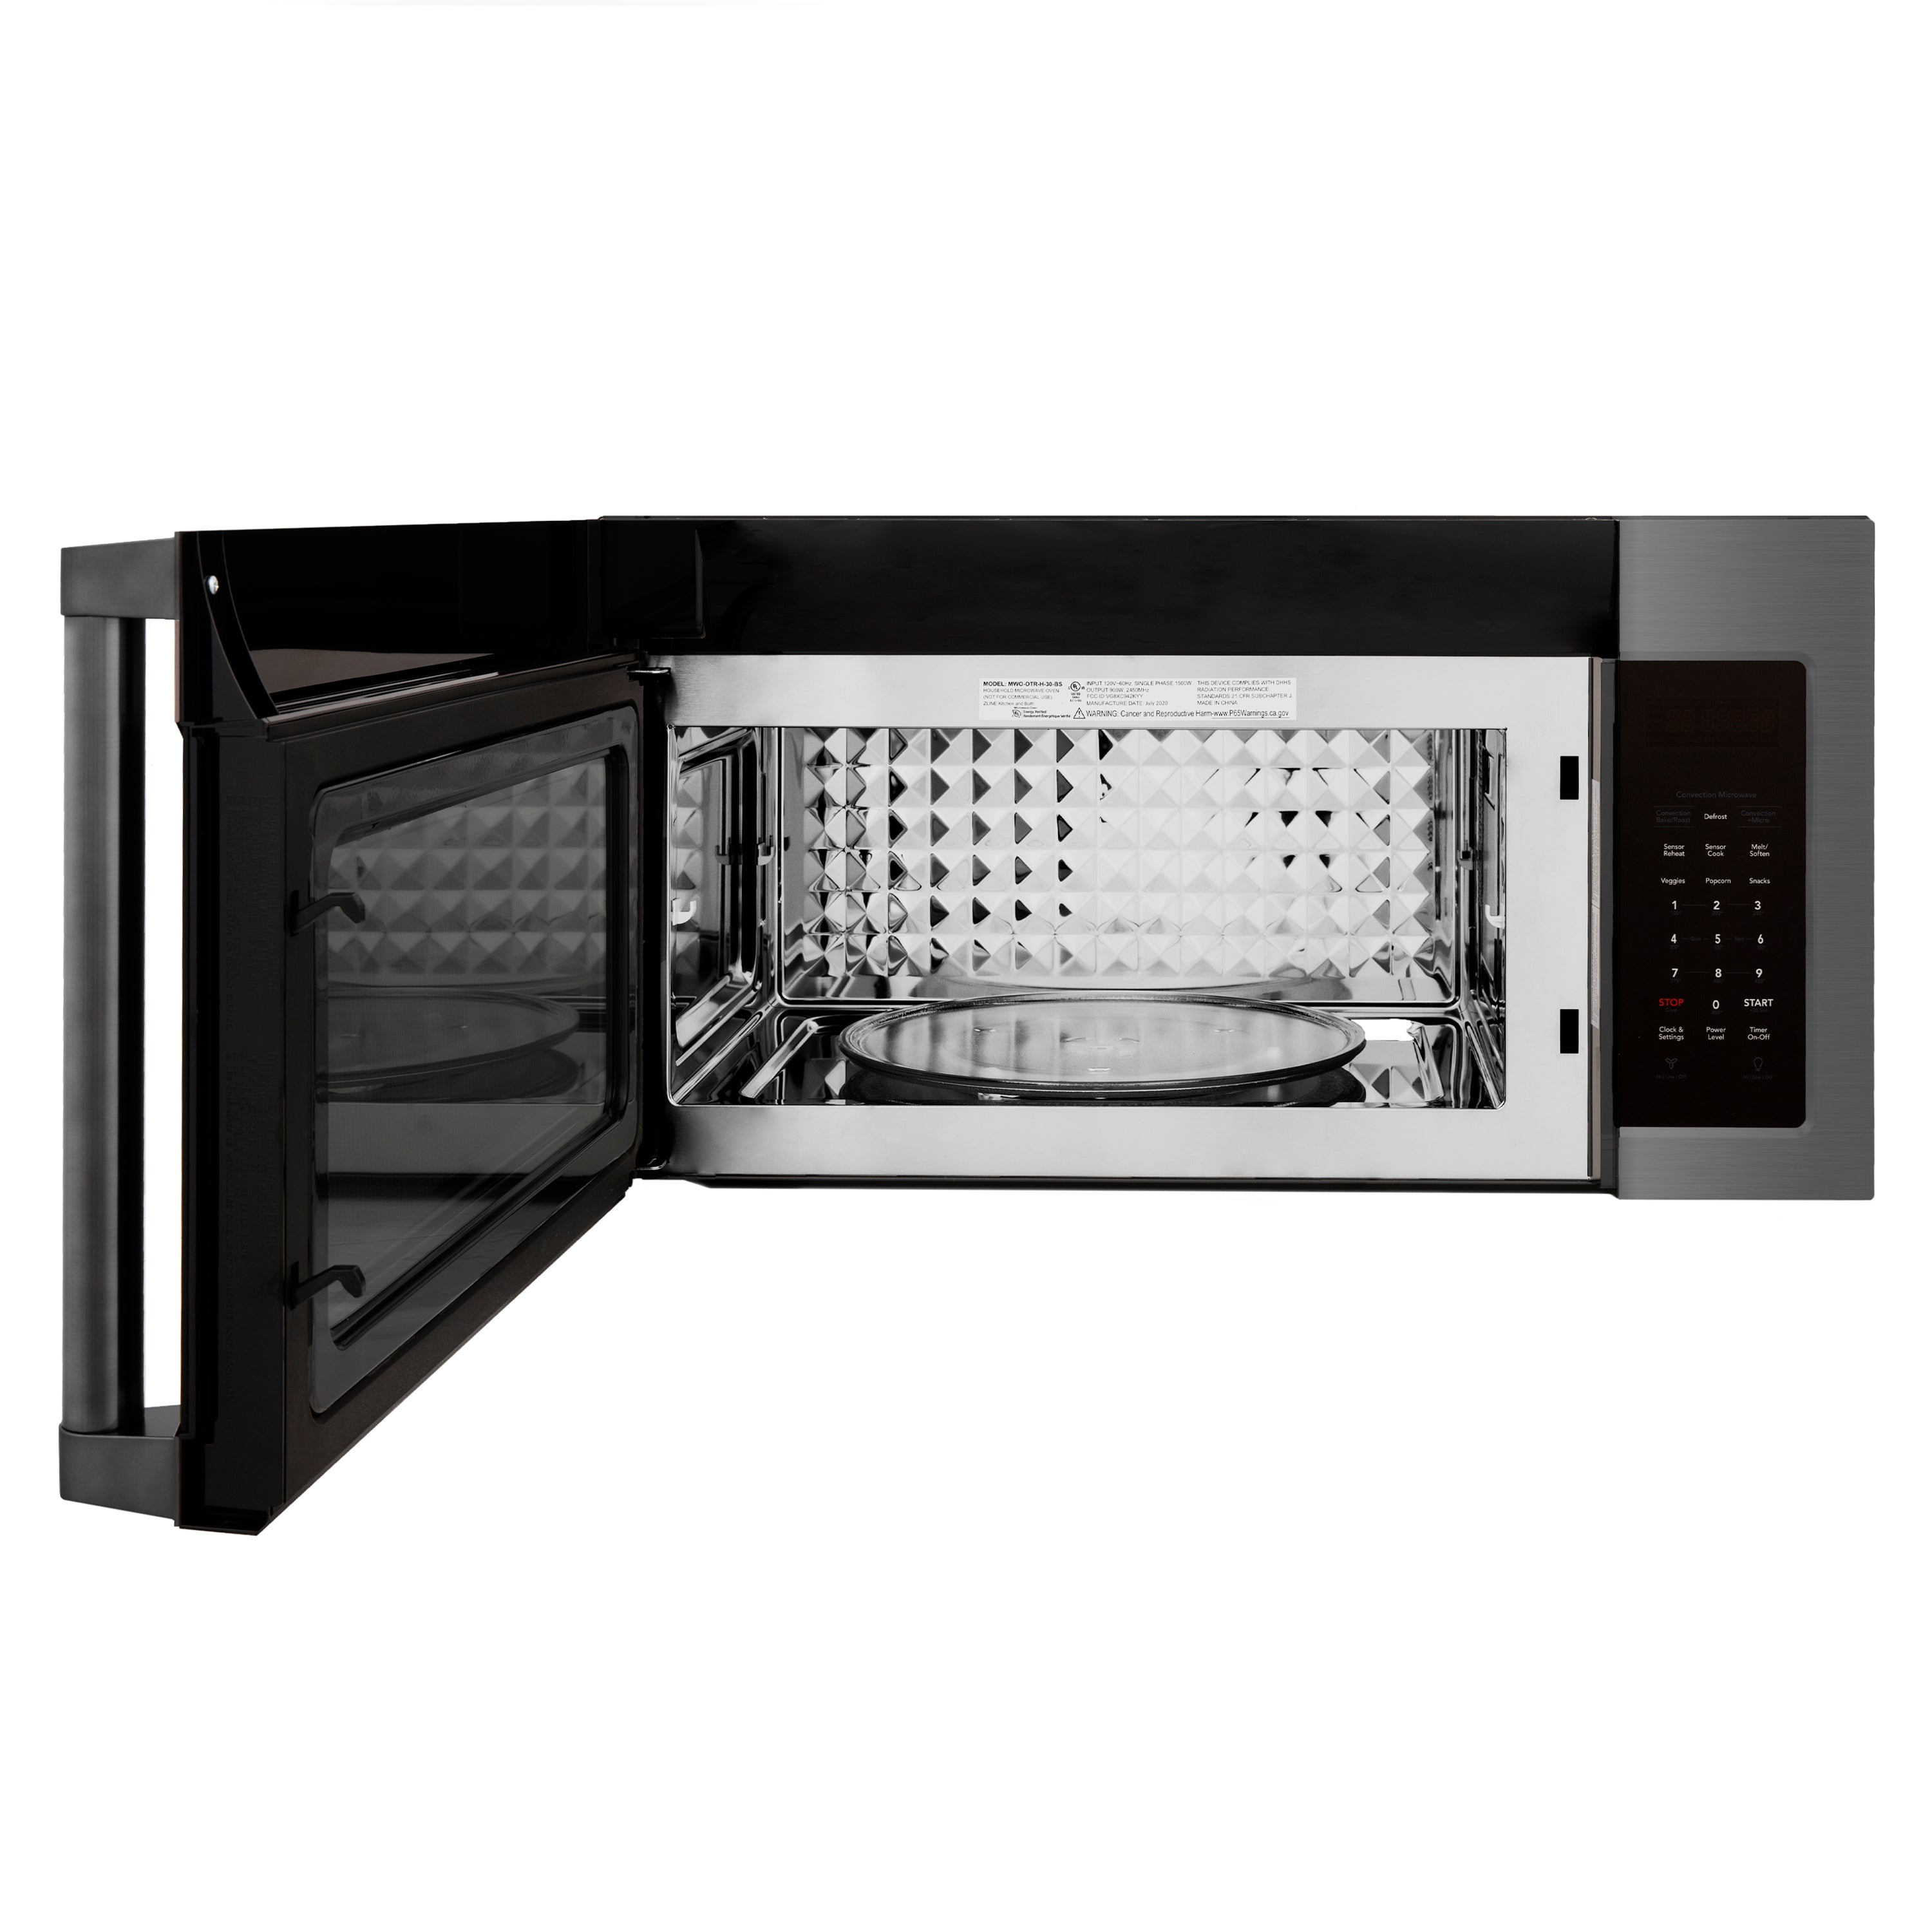 ZLINE 30 in. Black Stainless Steel Over the Range Microwave (MWO-OTR-H-BS) features a DiamondTech Interior engineered to scatter microwaves to ensure even cooking and prevent any cold spots